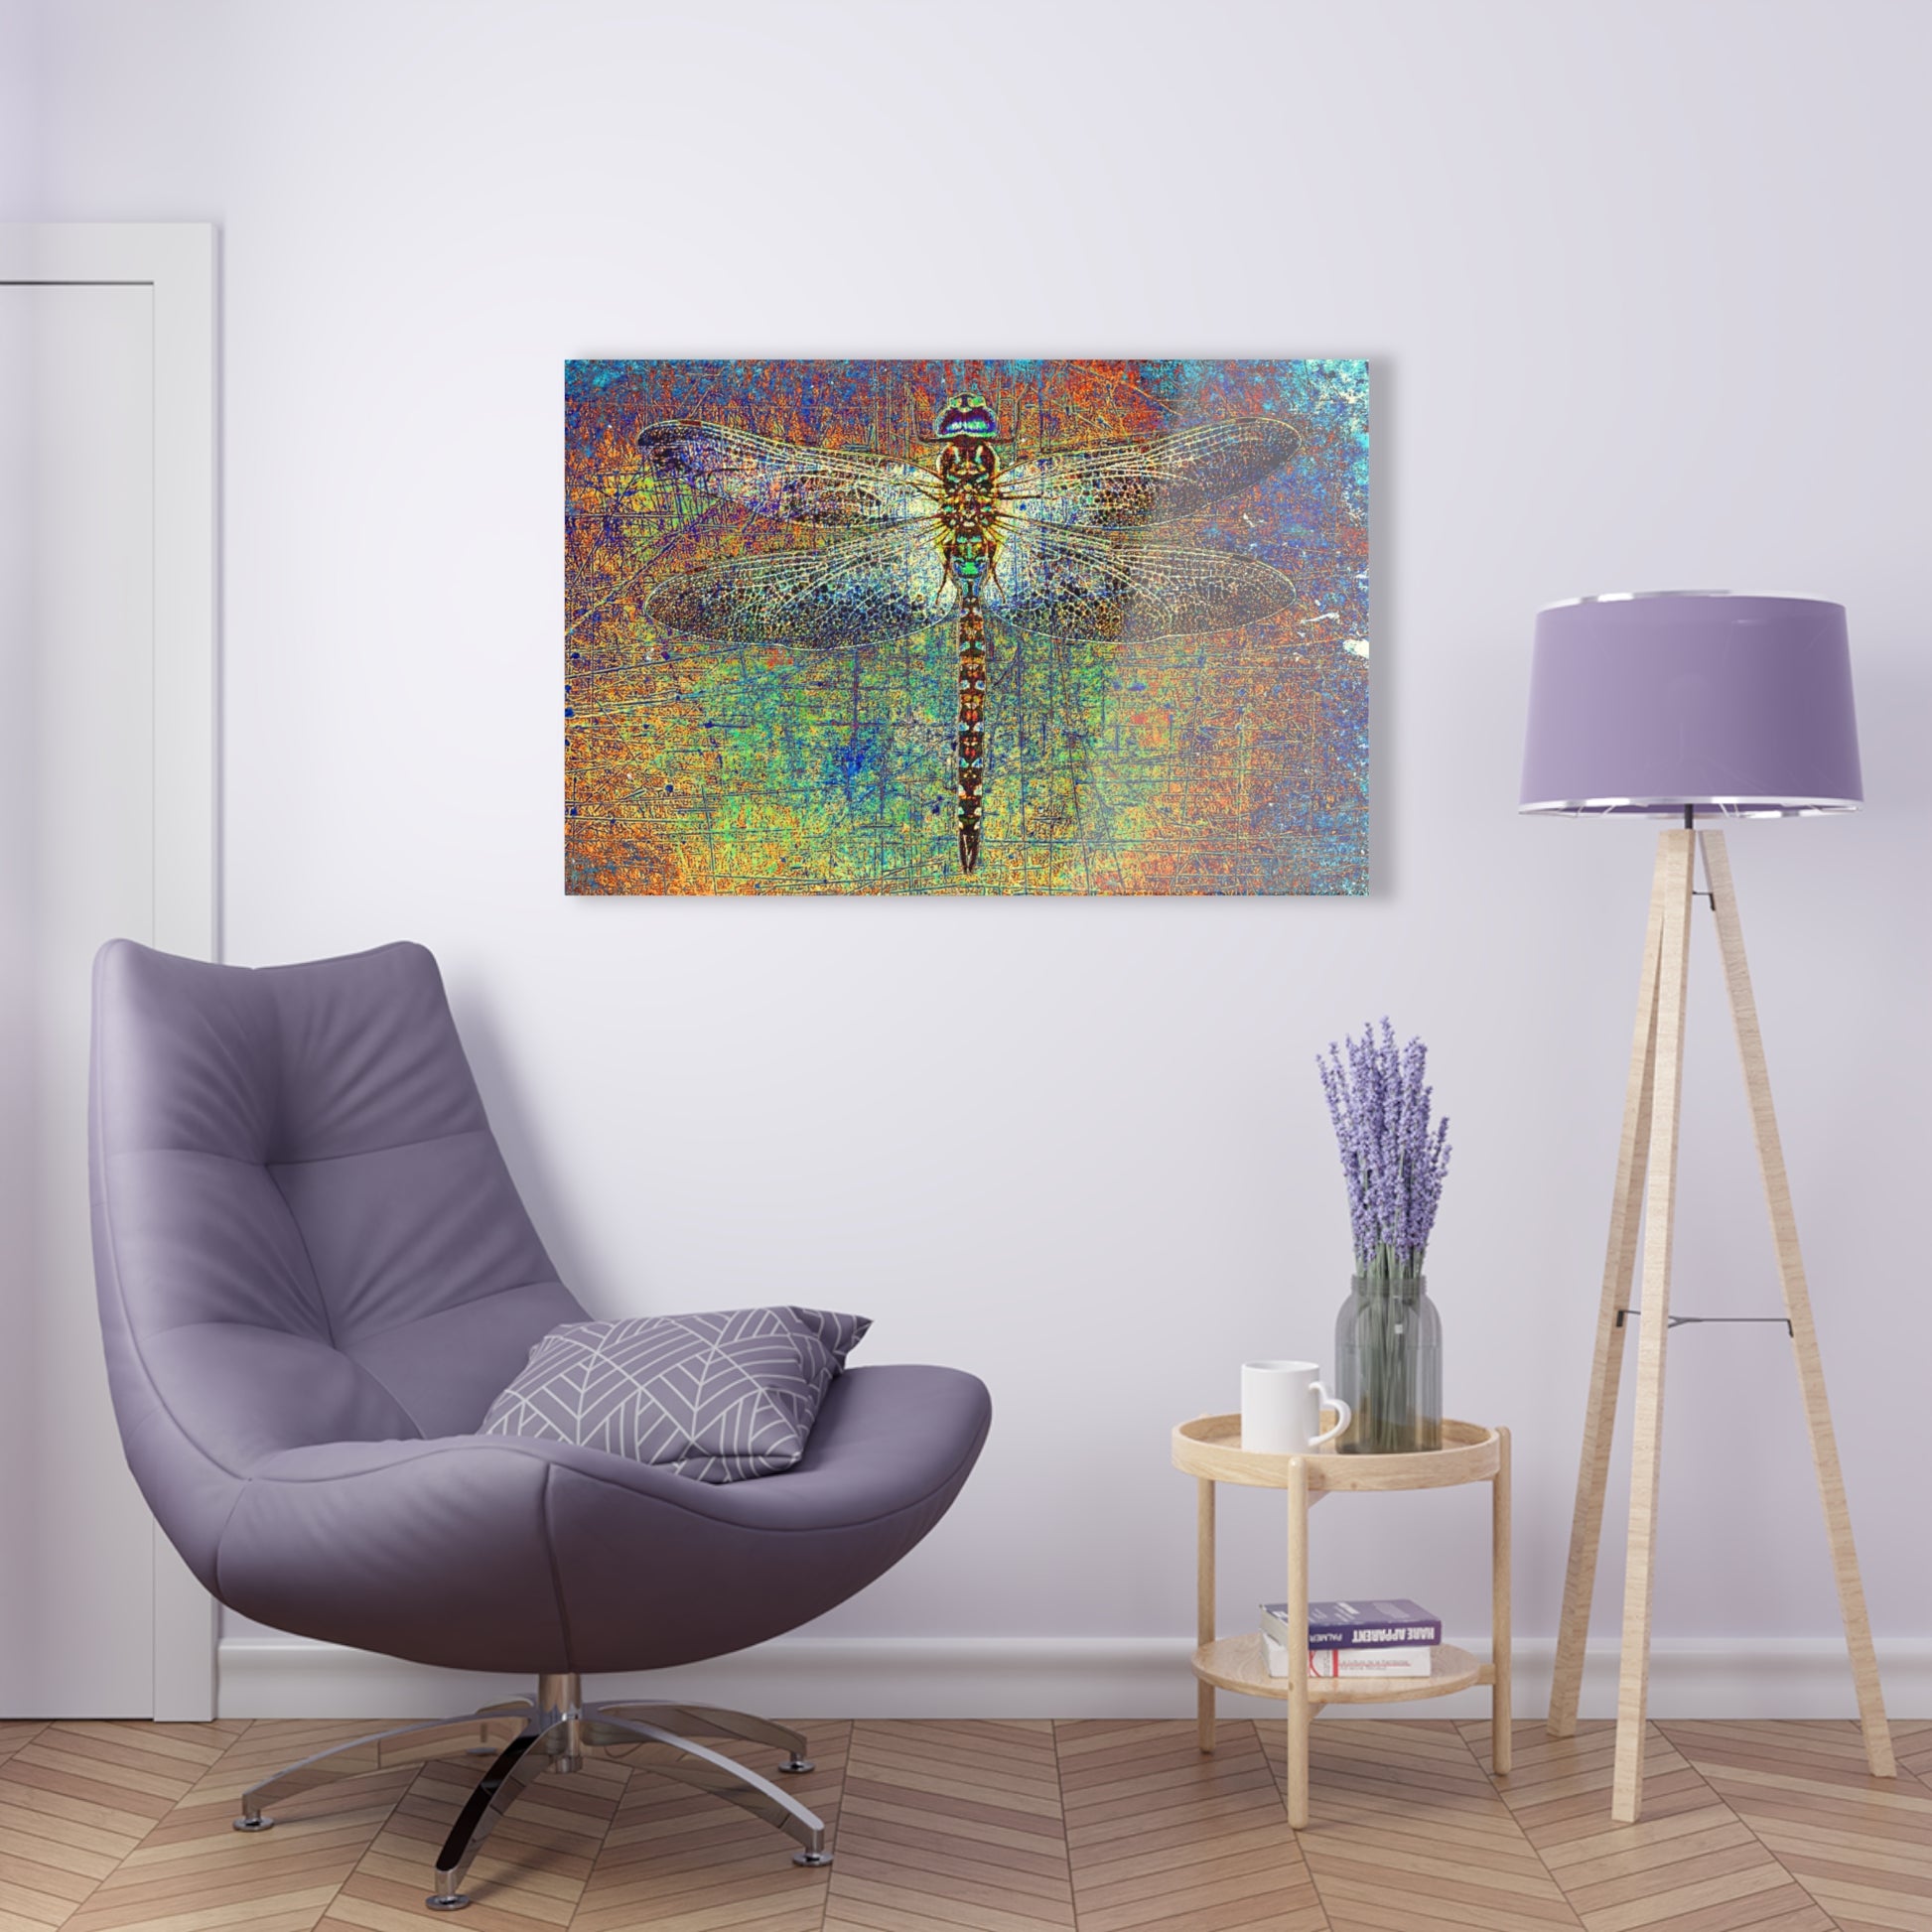 Dragonfly on Multicolor Background Printed on a Crystal Clear Acrylic Panel 36x24 hung on white wall